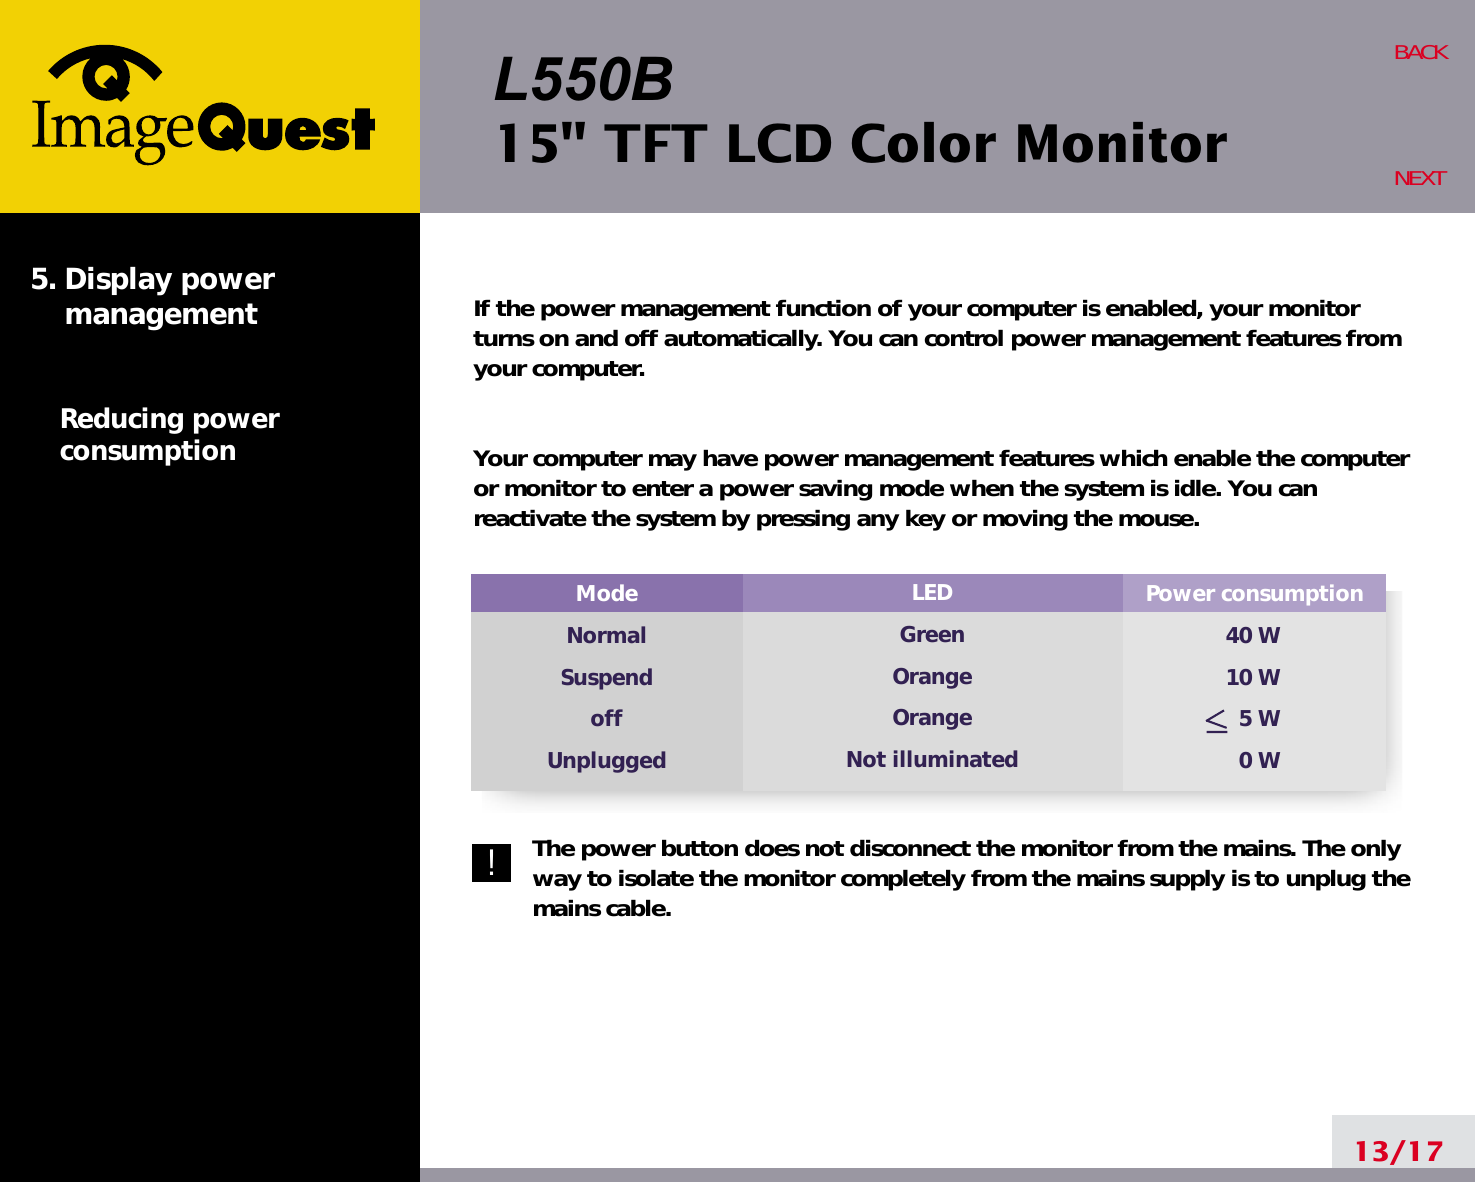 L550B15&quot; TFT LCD Color MonitorPower consumption40 W10 W5 W0 WModeNormalSuspendoffUnpluggedLEDGreenOrangeOrangeNot illuminatedIf the power management function of your computer is enabled, your monitorturns on and off automatically. You can control power management features fromyour computer.Your computer may have power management features which enable the computeror monitor to enter a power saving mode when the system is idle. You canreactivate the system by pressing any key or moving the mouse.The power button does not disconnect the monitor from the mains. The onlyway to isolate the monitor completely from the mains supply is to unplug themains cable.13/17BACKNEXT5. Display power managementReducing powerconsumption!